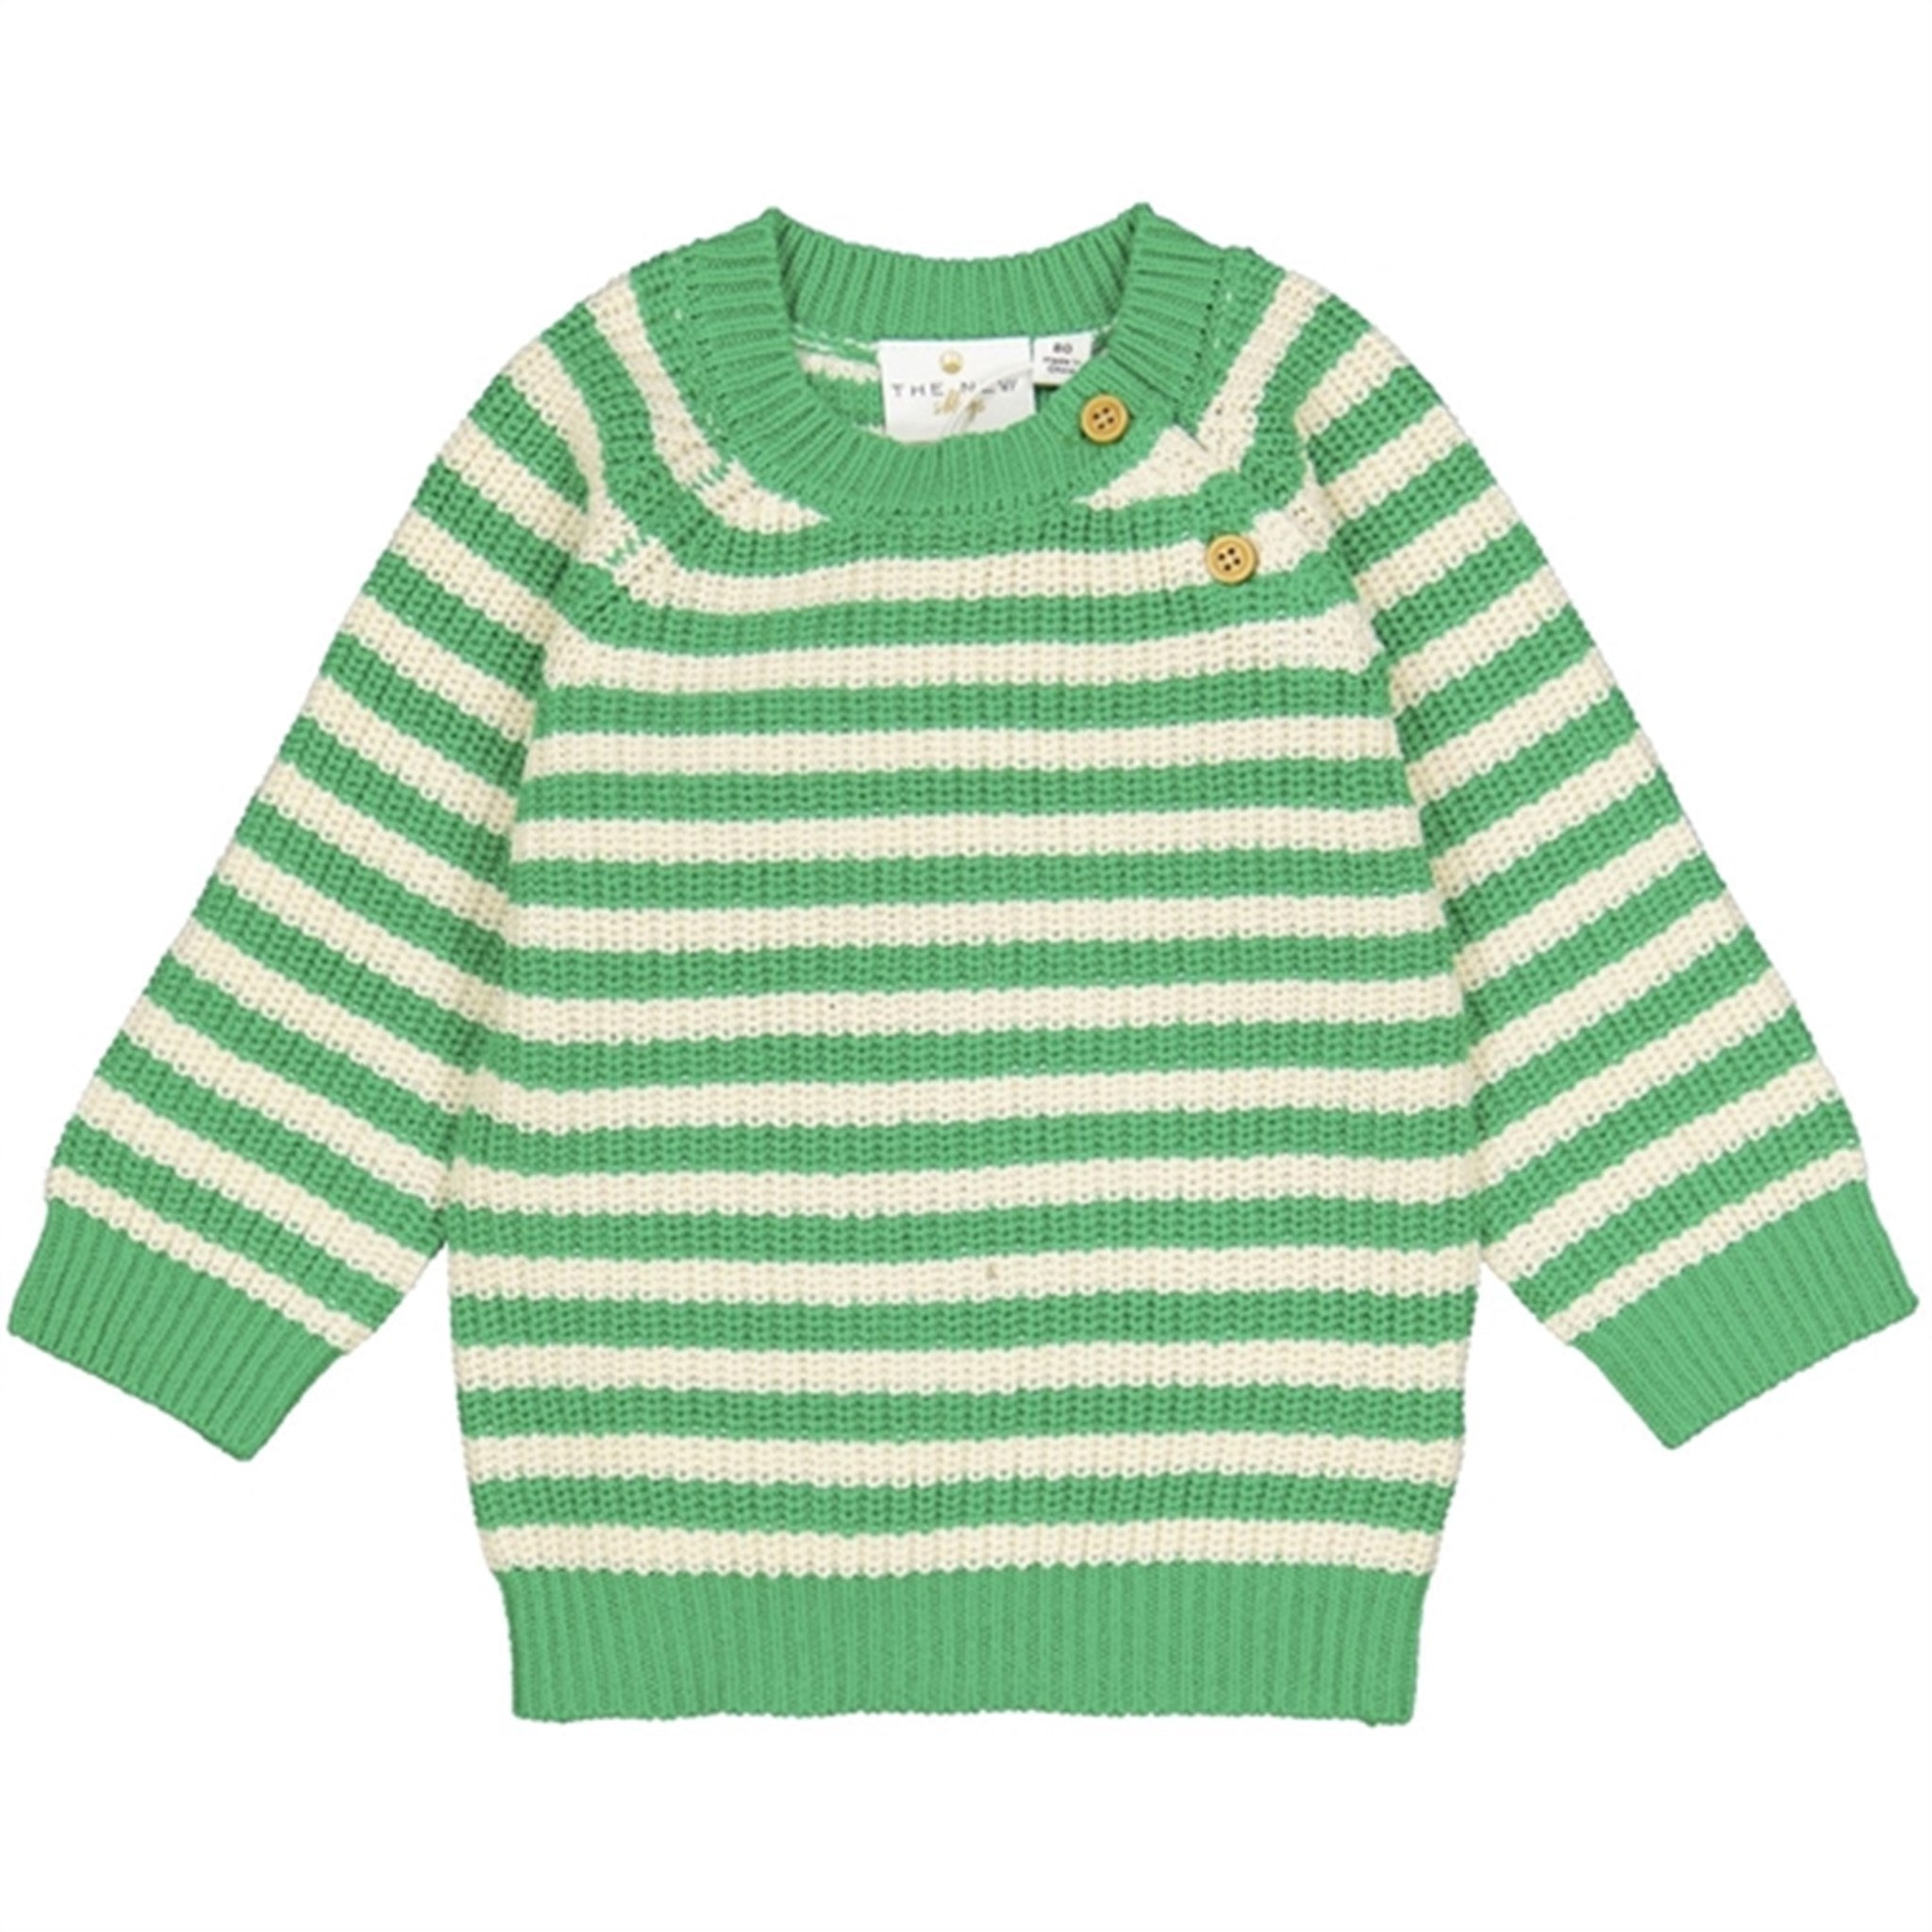 THE NEW Siblings Bright Green Ilfred Stickat Sweater